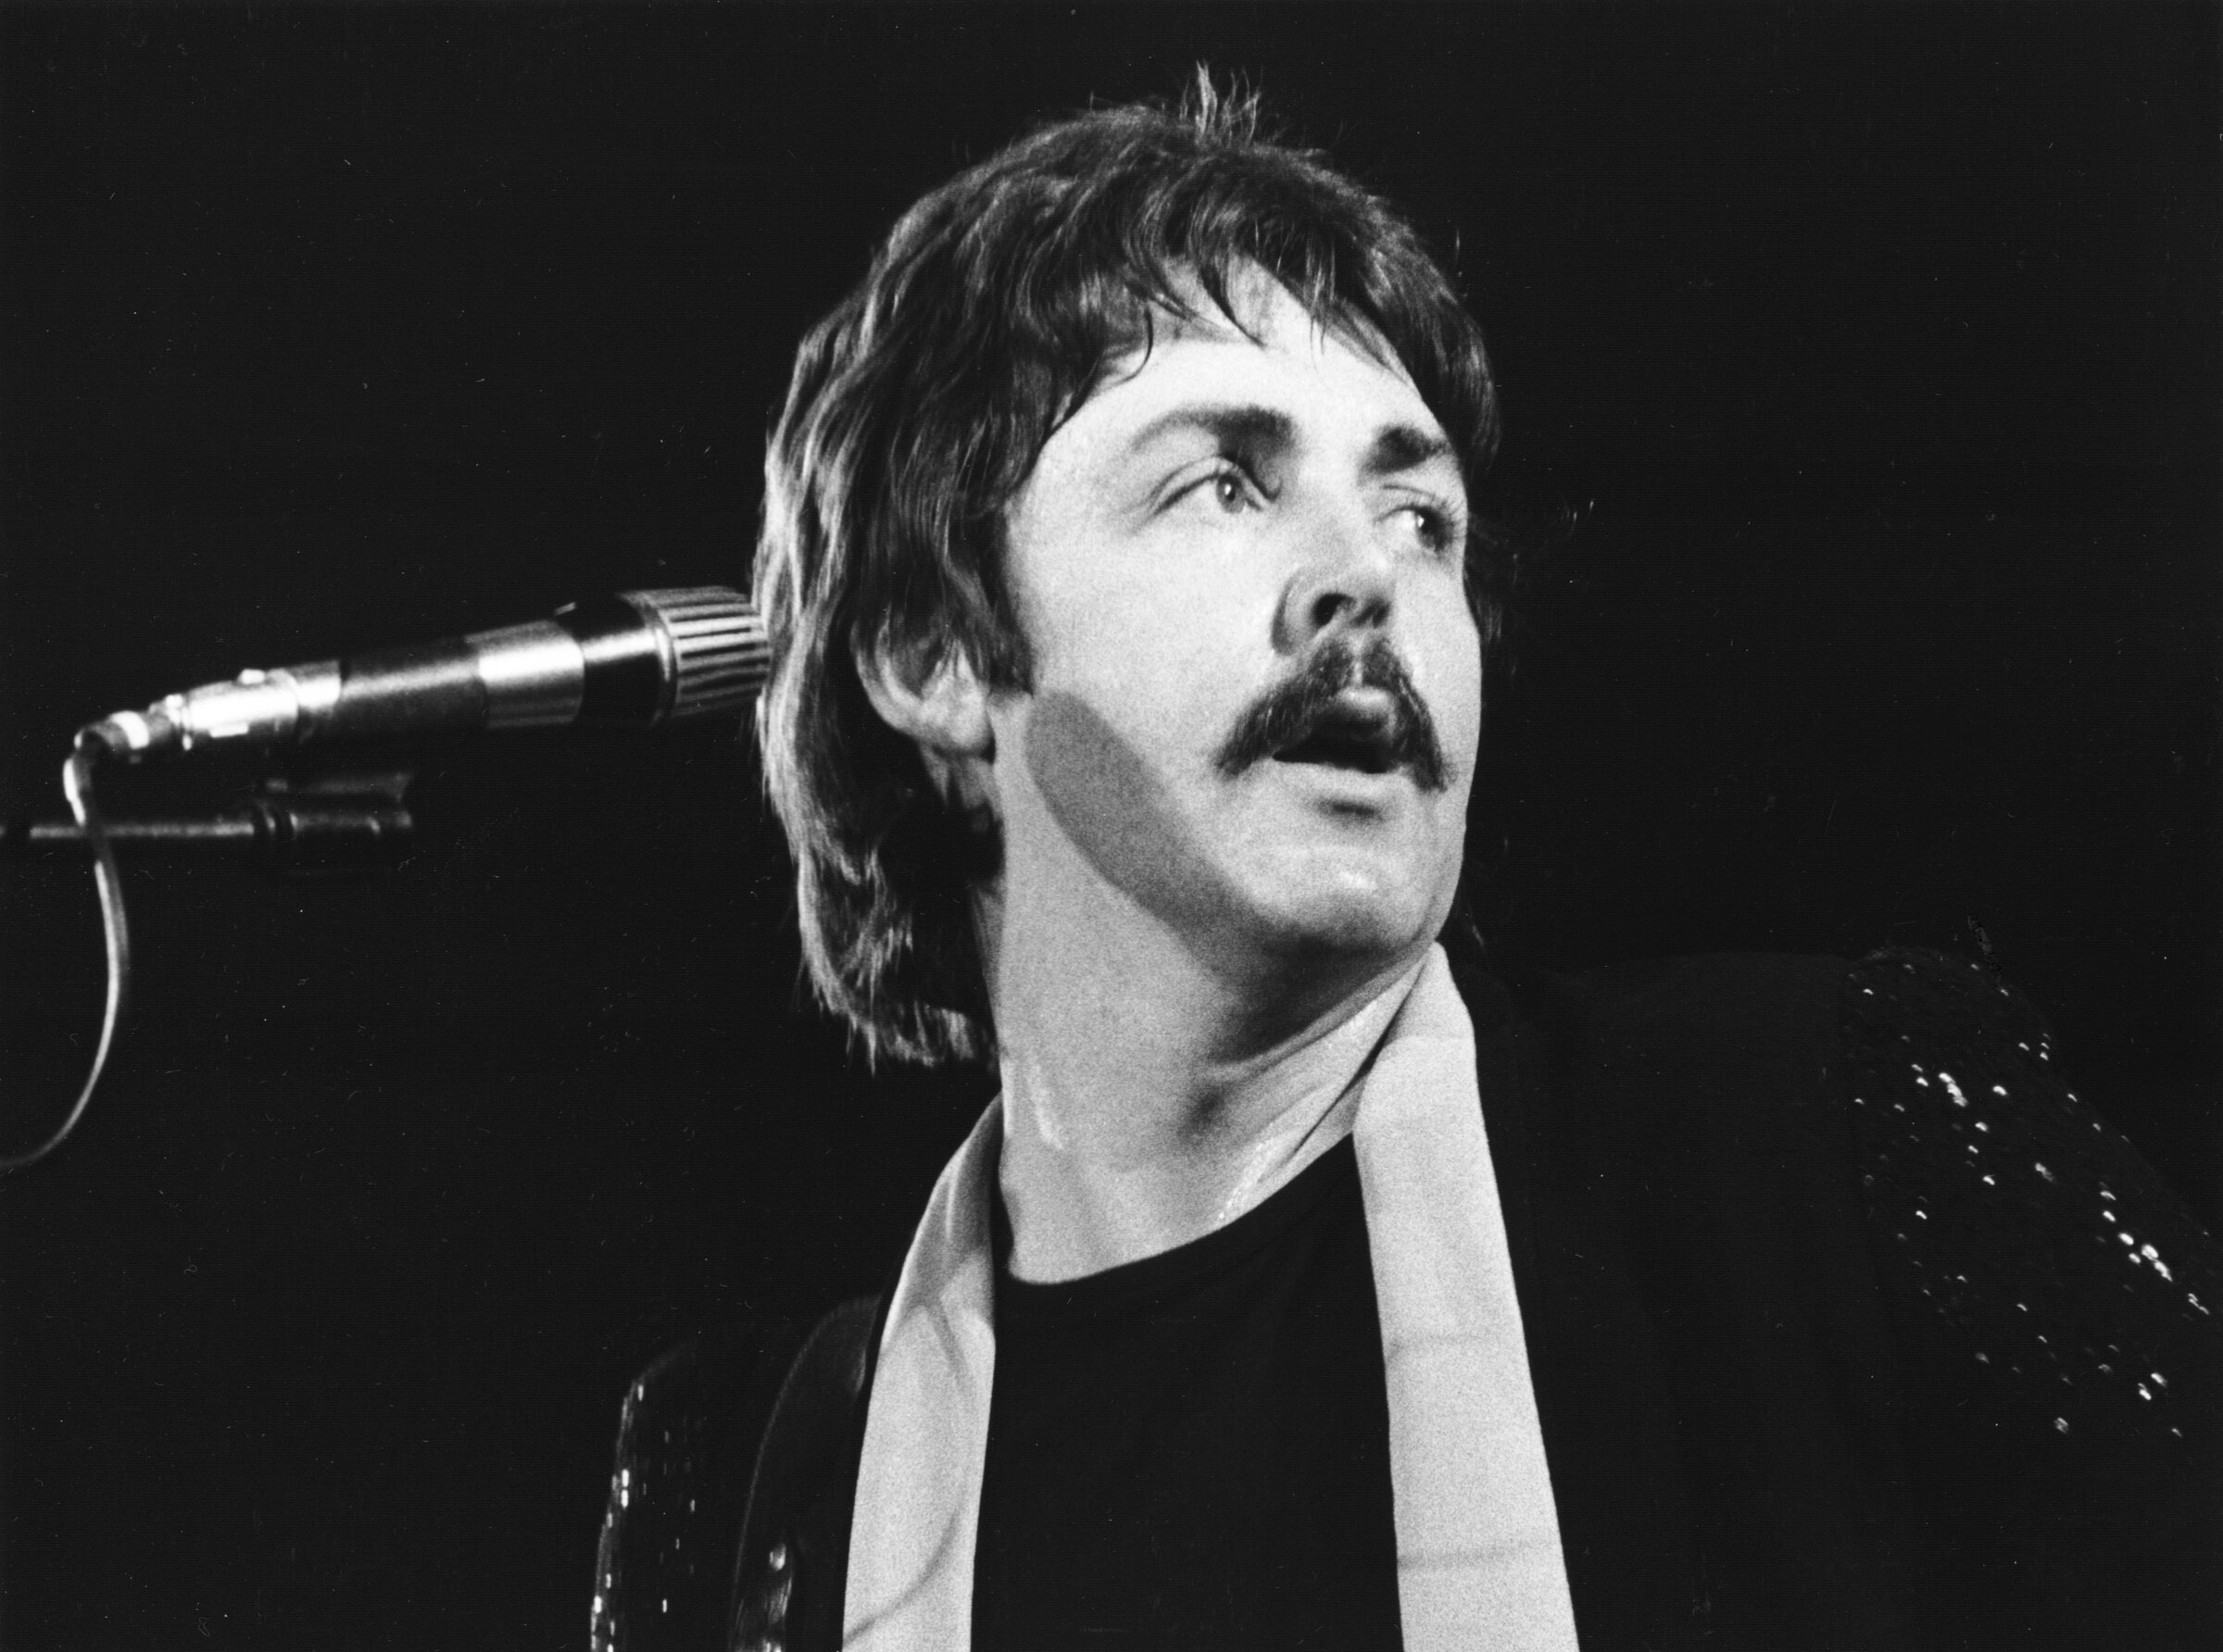 "Another Day" era Paul McCartney with a mustache